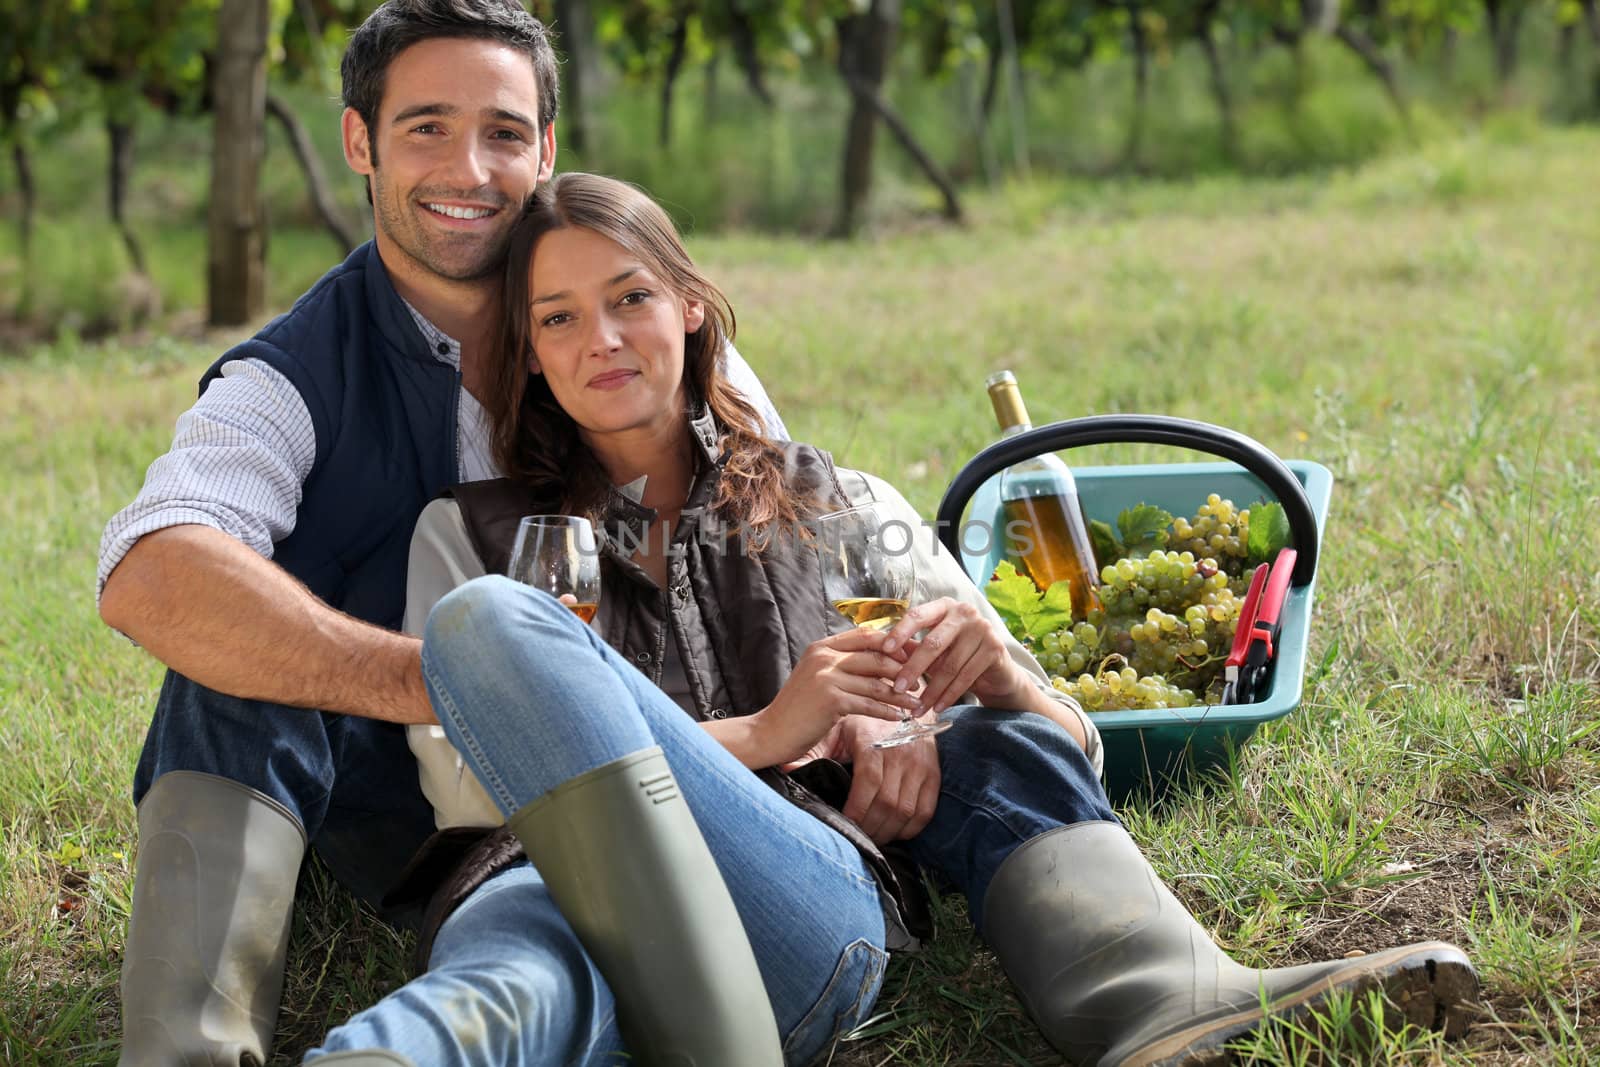 Couple having a picnic in a vineyard by phovoir